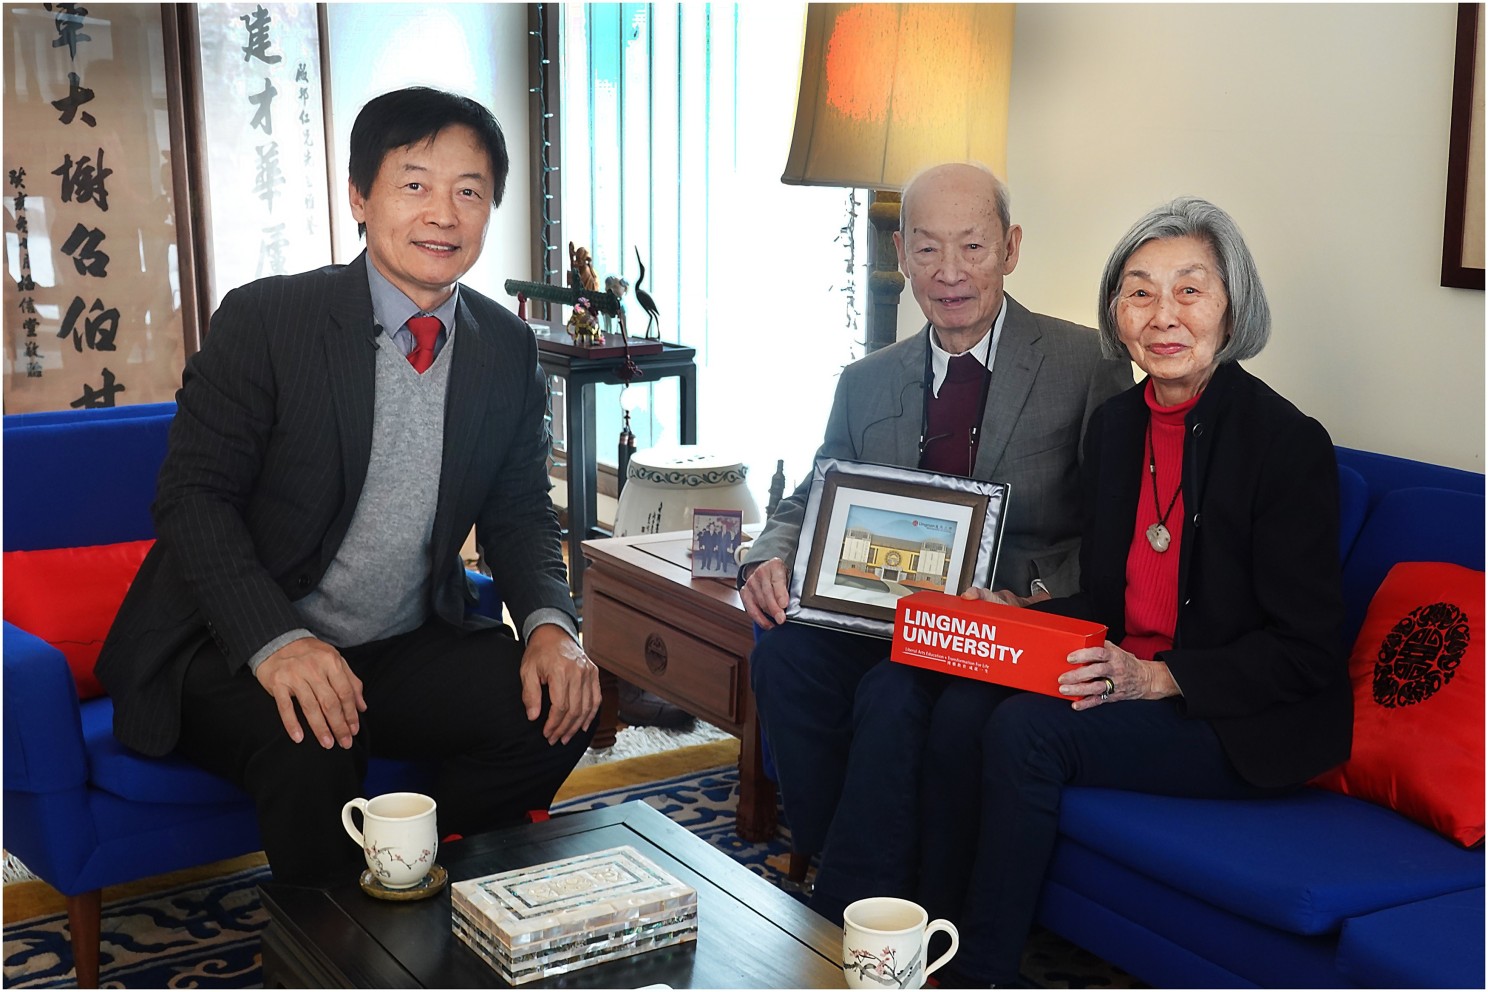 Prof S. Joe Qin, President of Lingnan University, presents souvenirs to Prof Gregory Chow Chi-chong and his wife, Paula Chow. (From left to right: President Qin, Prof Chow, Paula Chow)